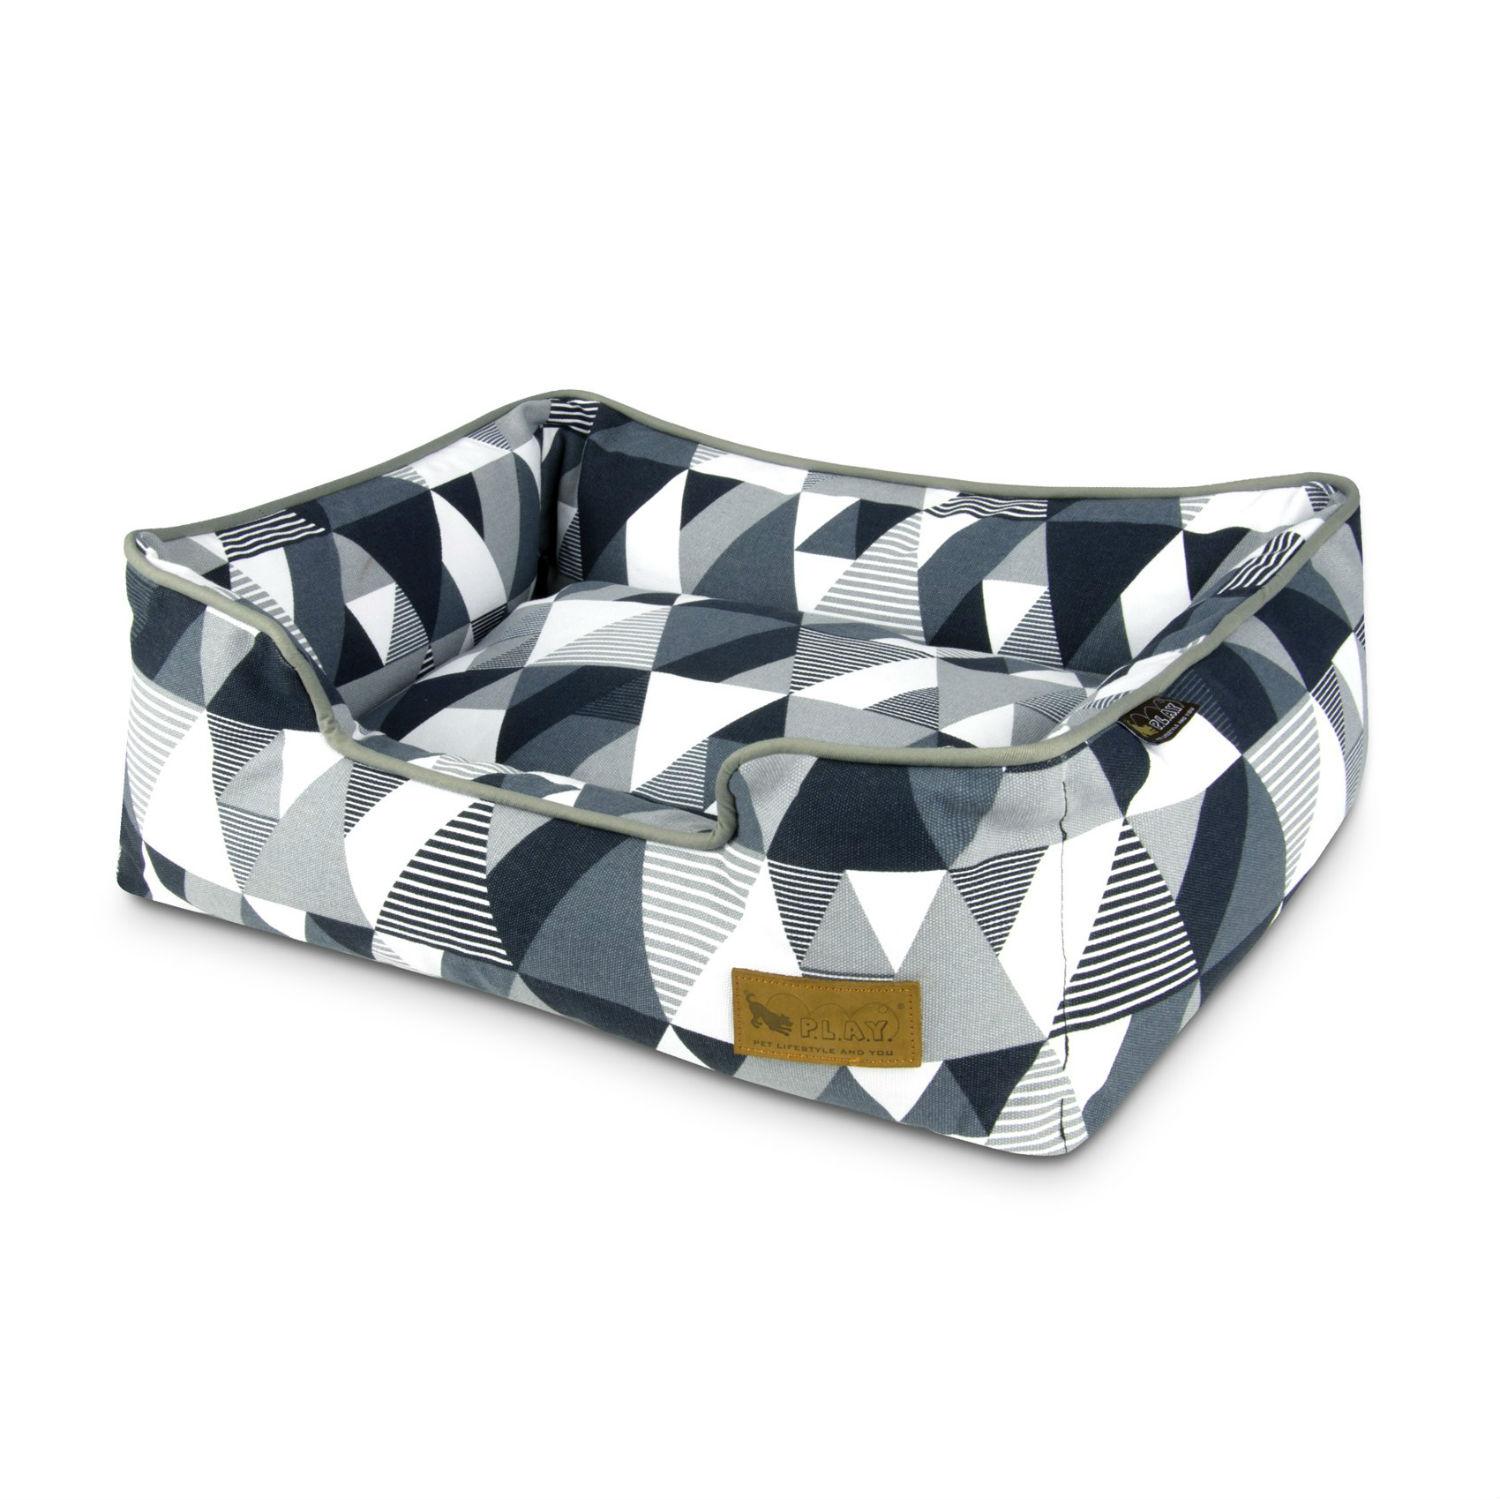 P.L.A.Y. Mosaic Lounge Dog Bed - Tuxedo